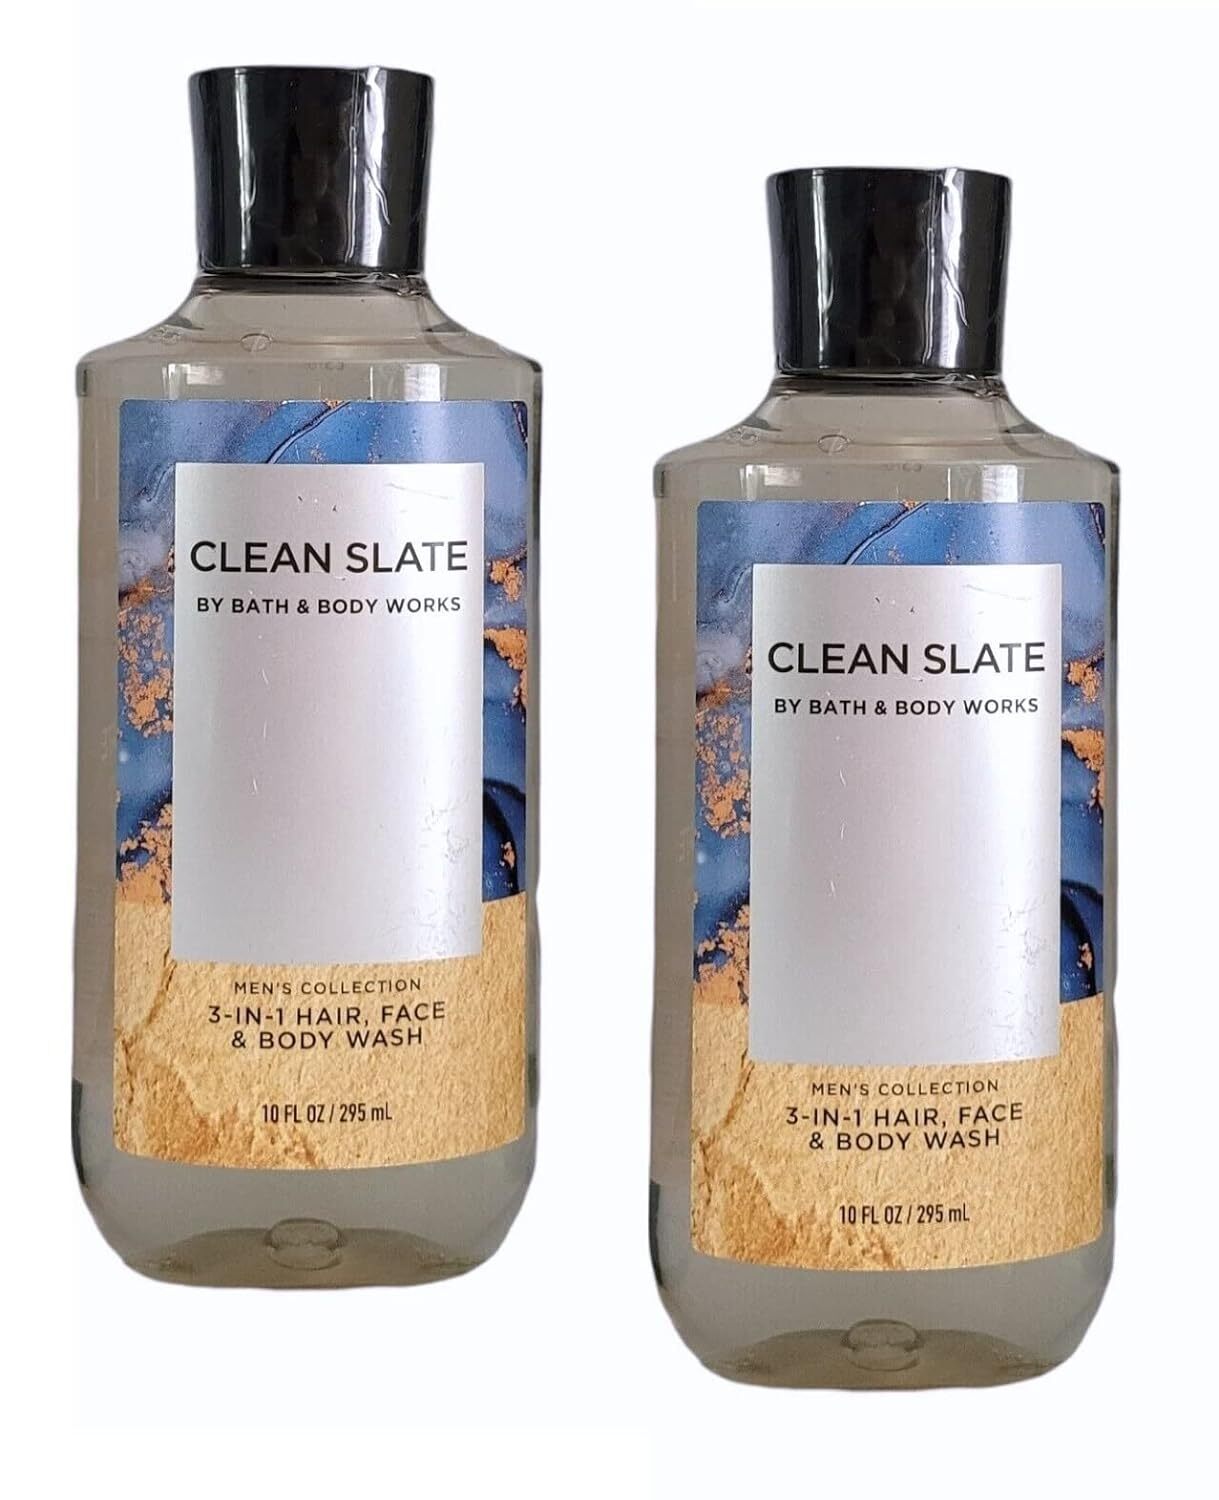 Bath and Body Works For Men Clean Slate 3-in-1 Hair, Face & Body Wash - Value Pack lot of 2 - Full Size (Clean Slate)